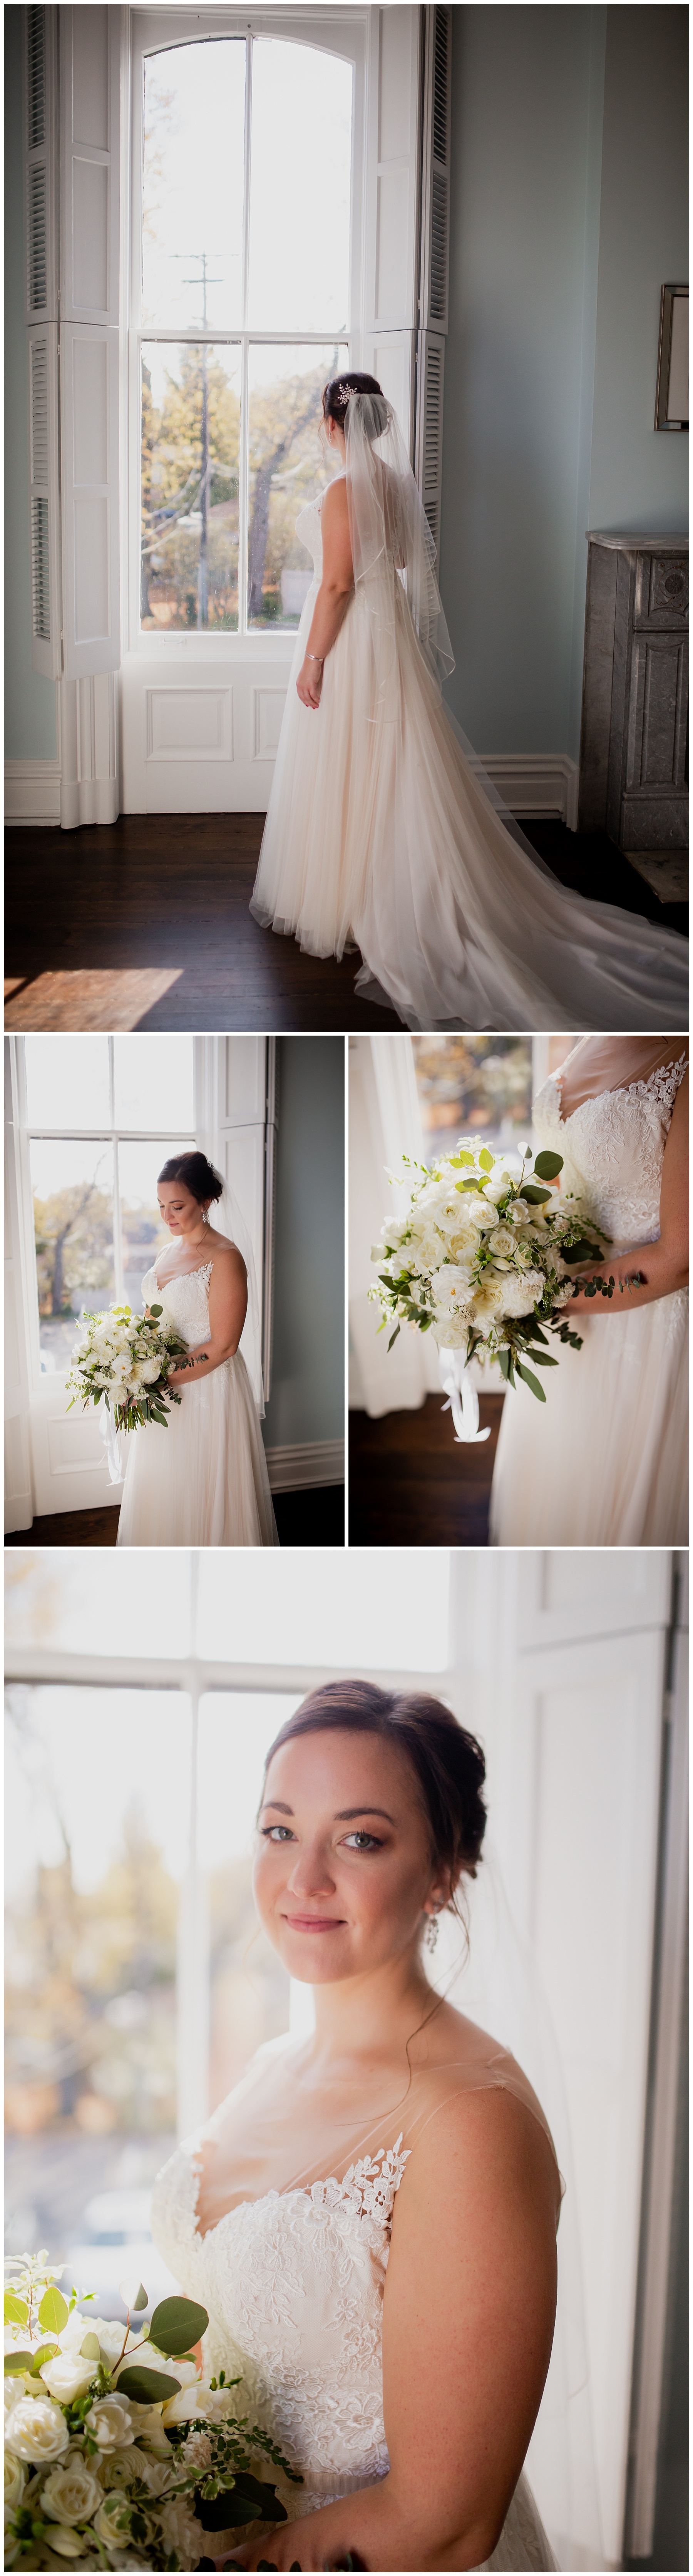 WISCONSIN WEDDING PHOTOGRAPHER -THE COVENANT AT MURRAY MANSION WEDDING-80.jpg